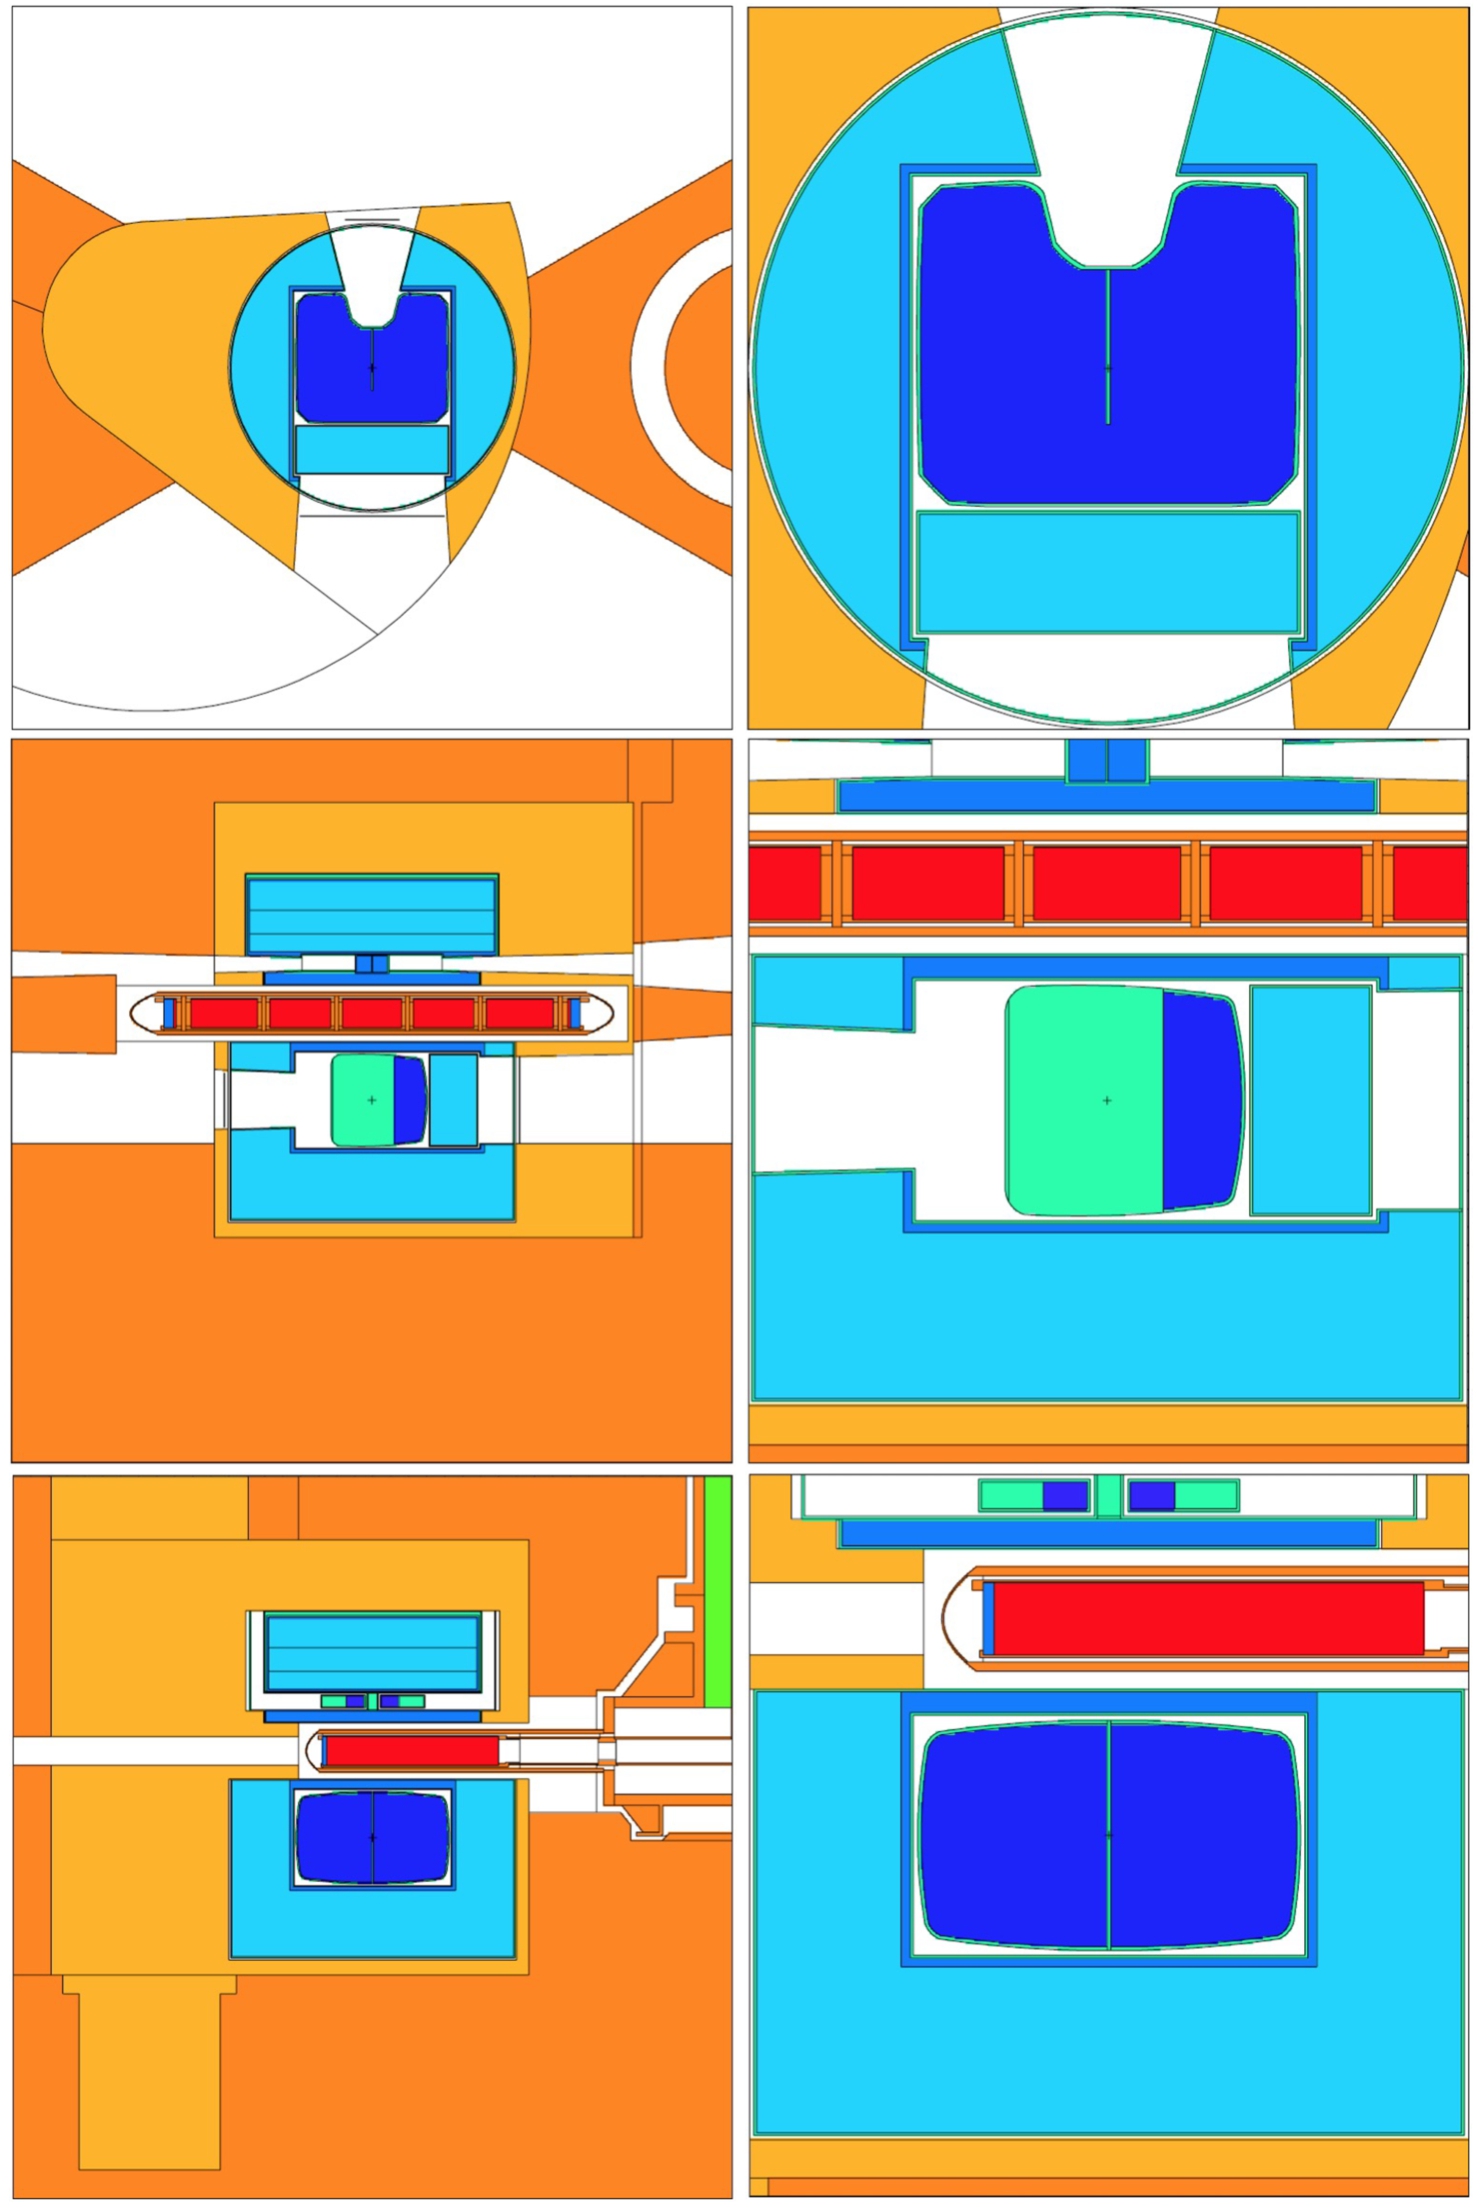 Graphical representation of the final design for the LD2 moderator with an U-shaped reentrant hole, separated Be filter and LD2 and rounded walls. The color codes are the following: orange: steel (twister frame, inner shielding, etc); dark blue: liquid ortho-deuterium; blue: light water; light blue: beryllium; green: aluminum. Note that cold Be filters and ambient Be reflector are shown using the same color; the same note applies to Al.